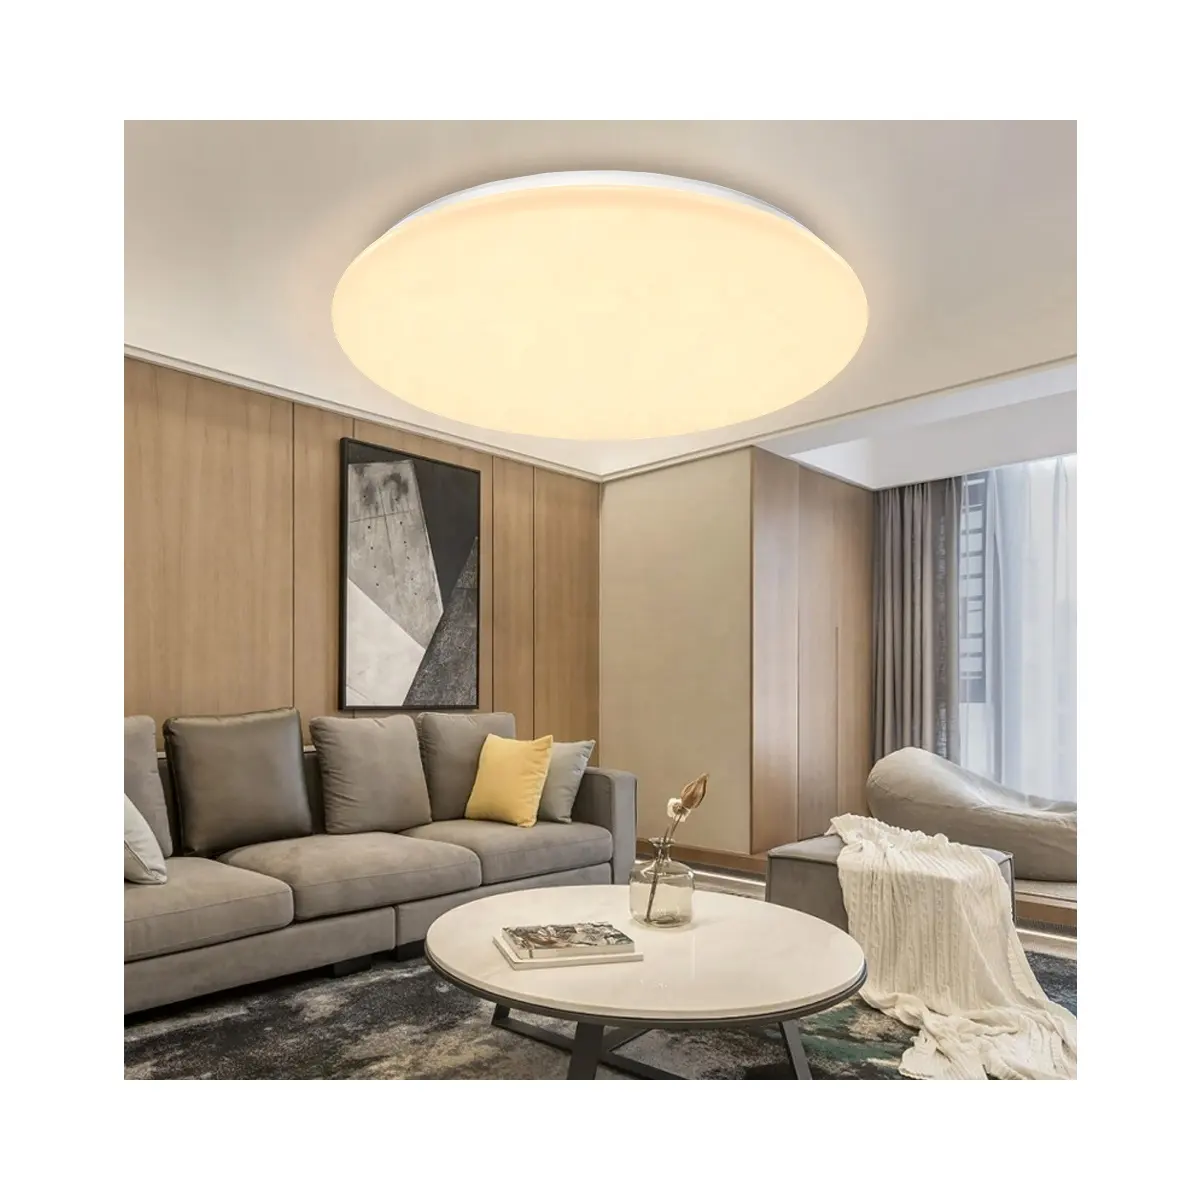 Recessed LED ceiling lights